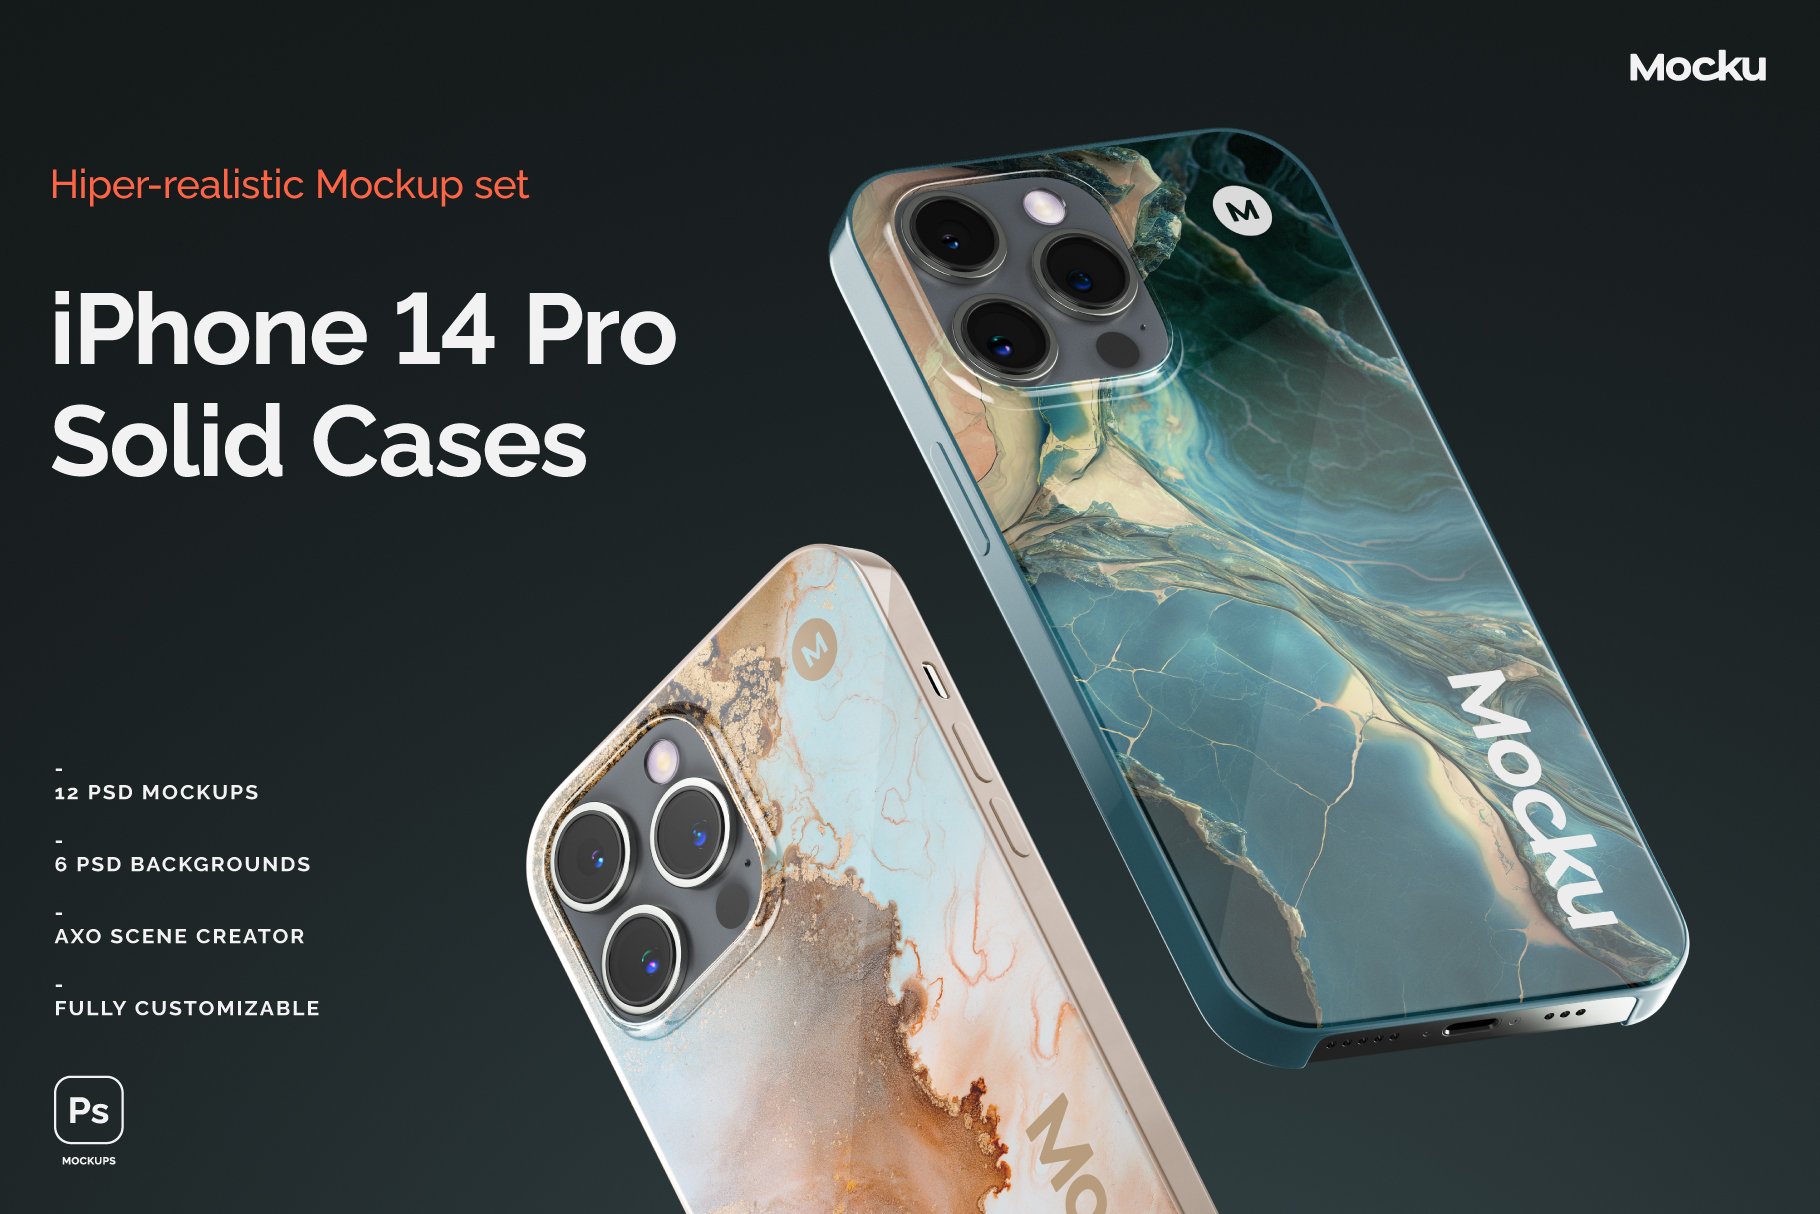 Iphone 14 Pro - Solid Cases preview image.